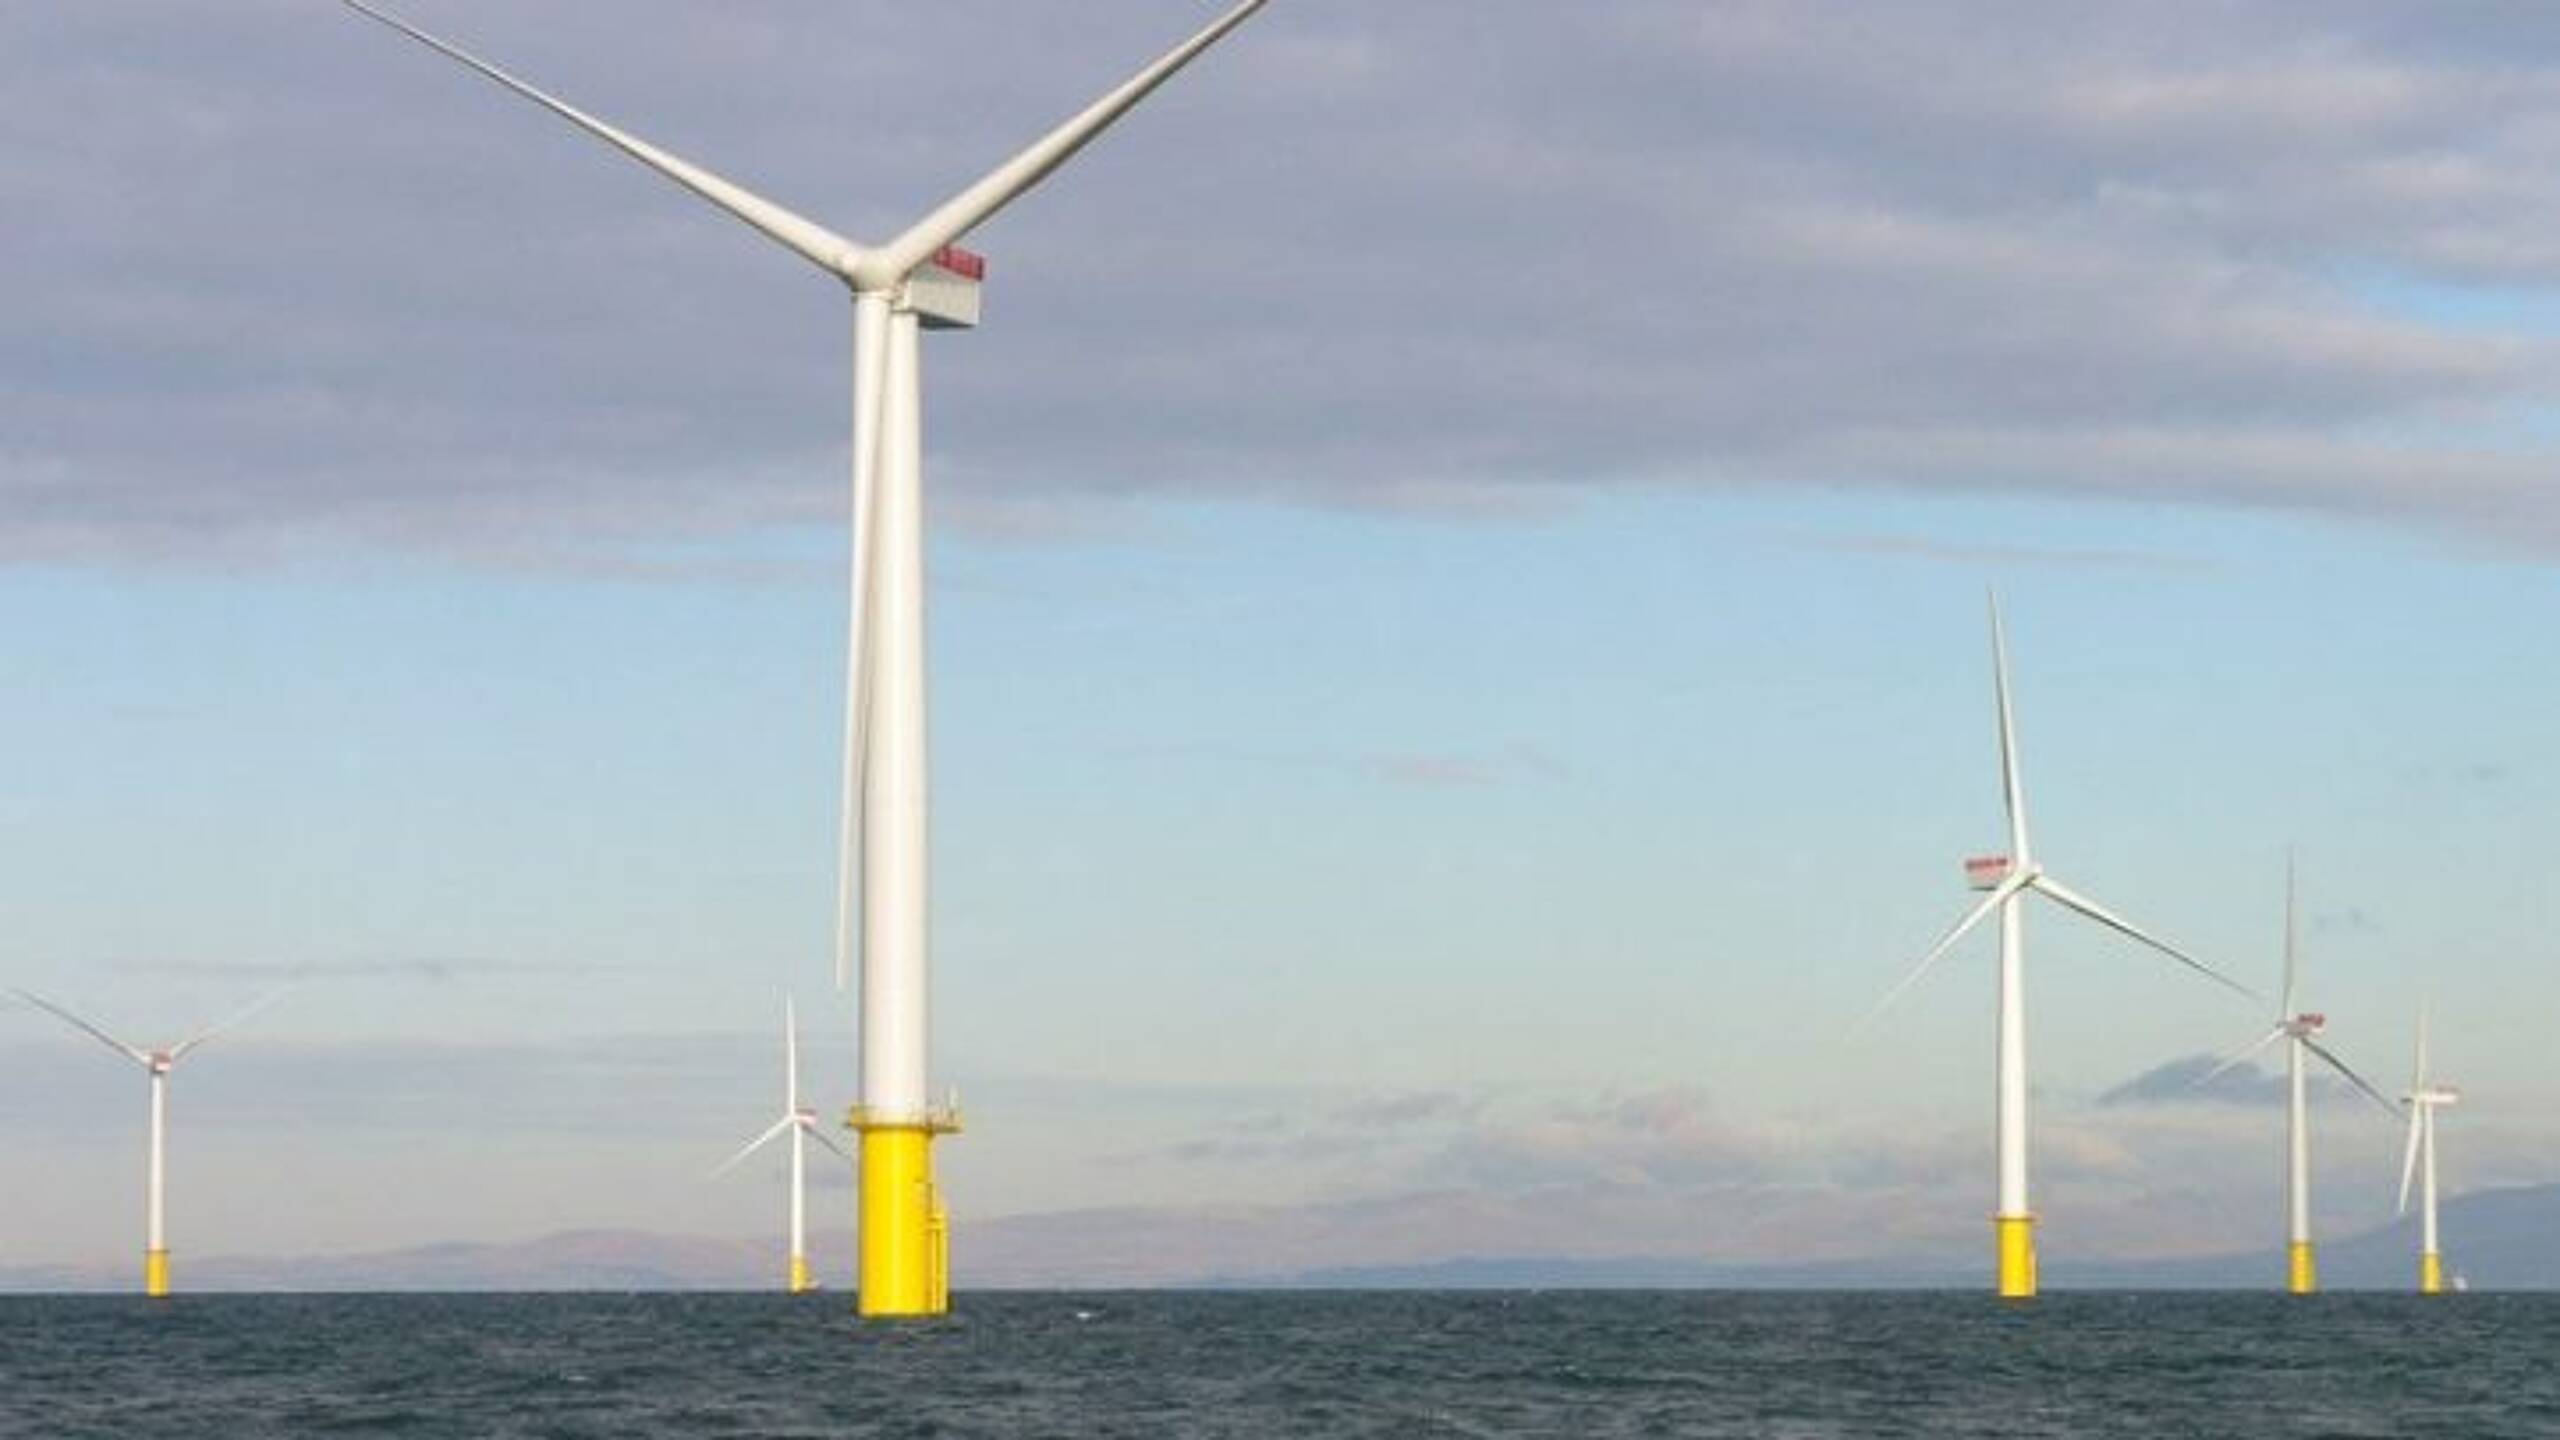 Avoidable and botched: Green groups react to offshore wind omission in CfD auctions